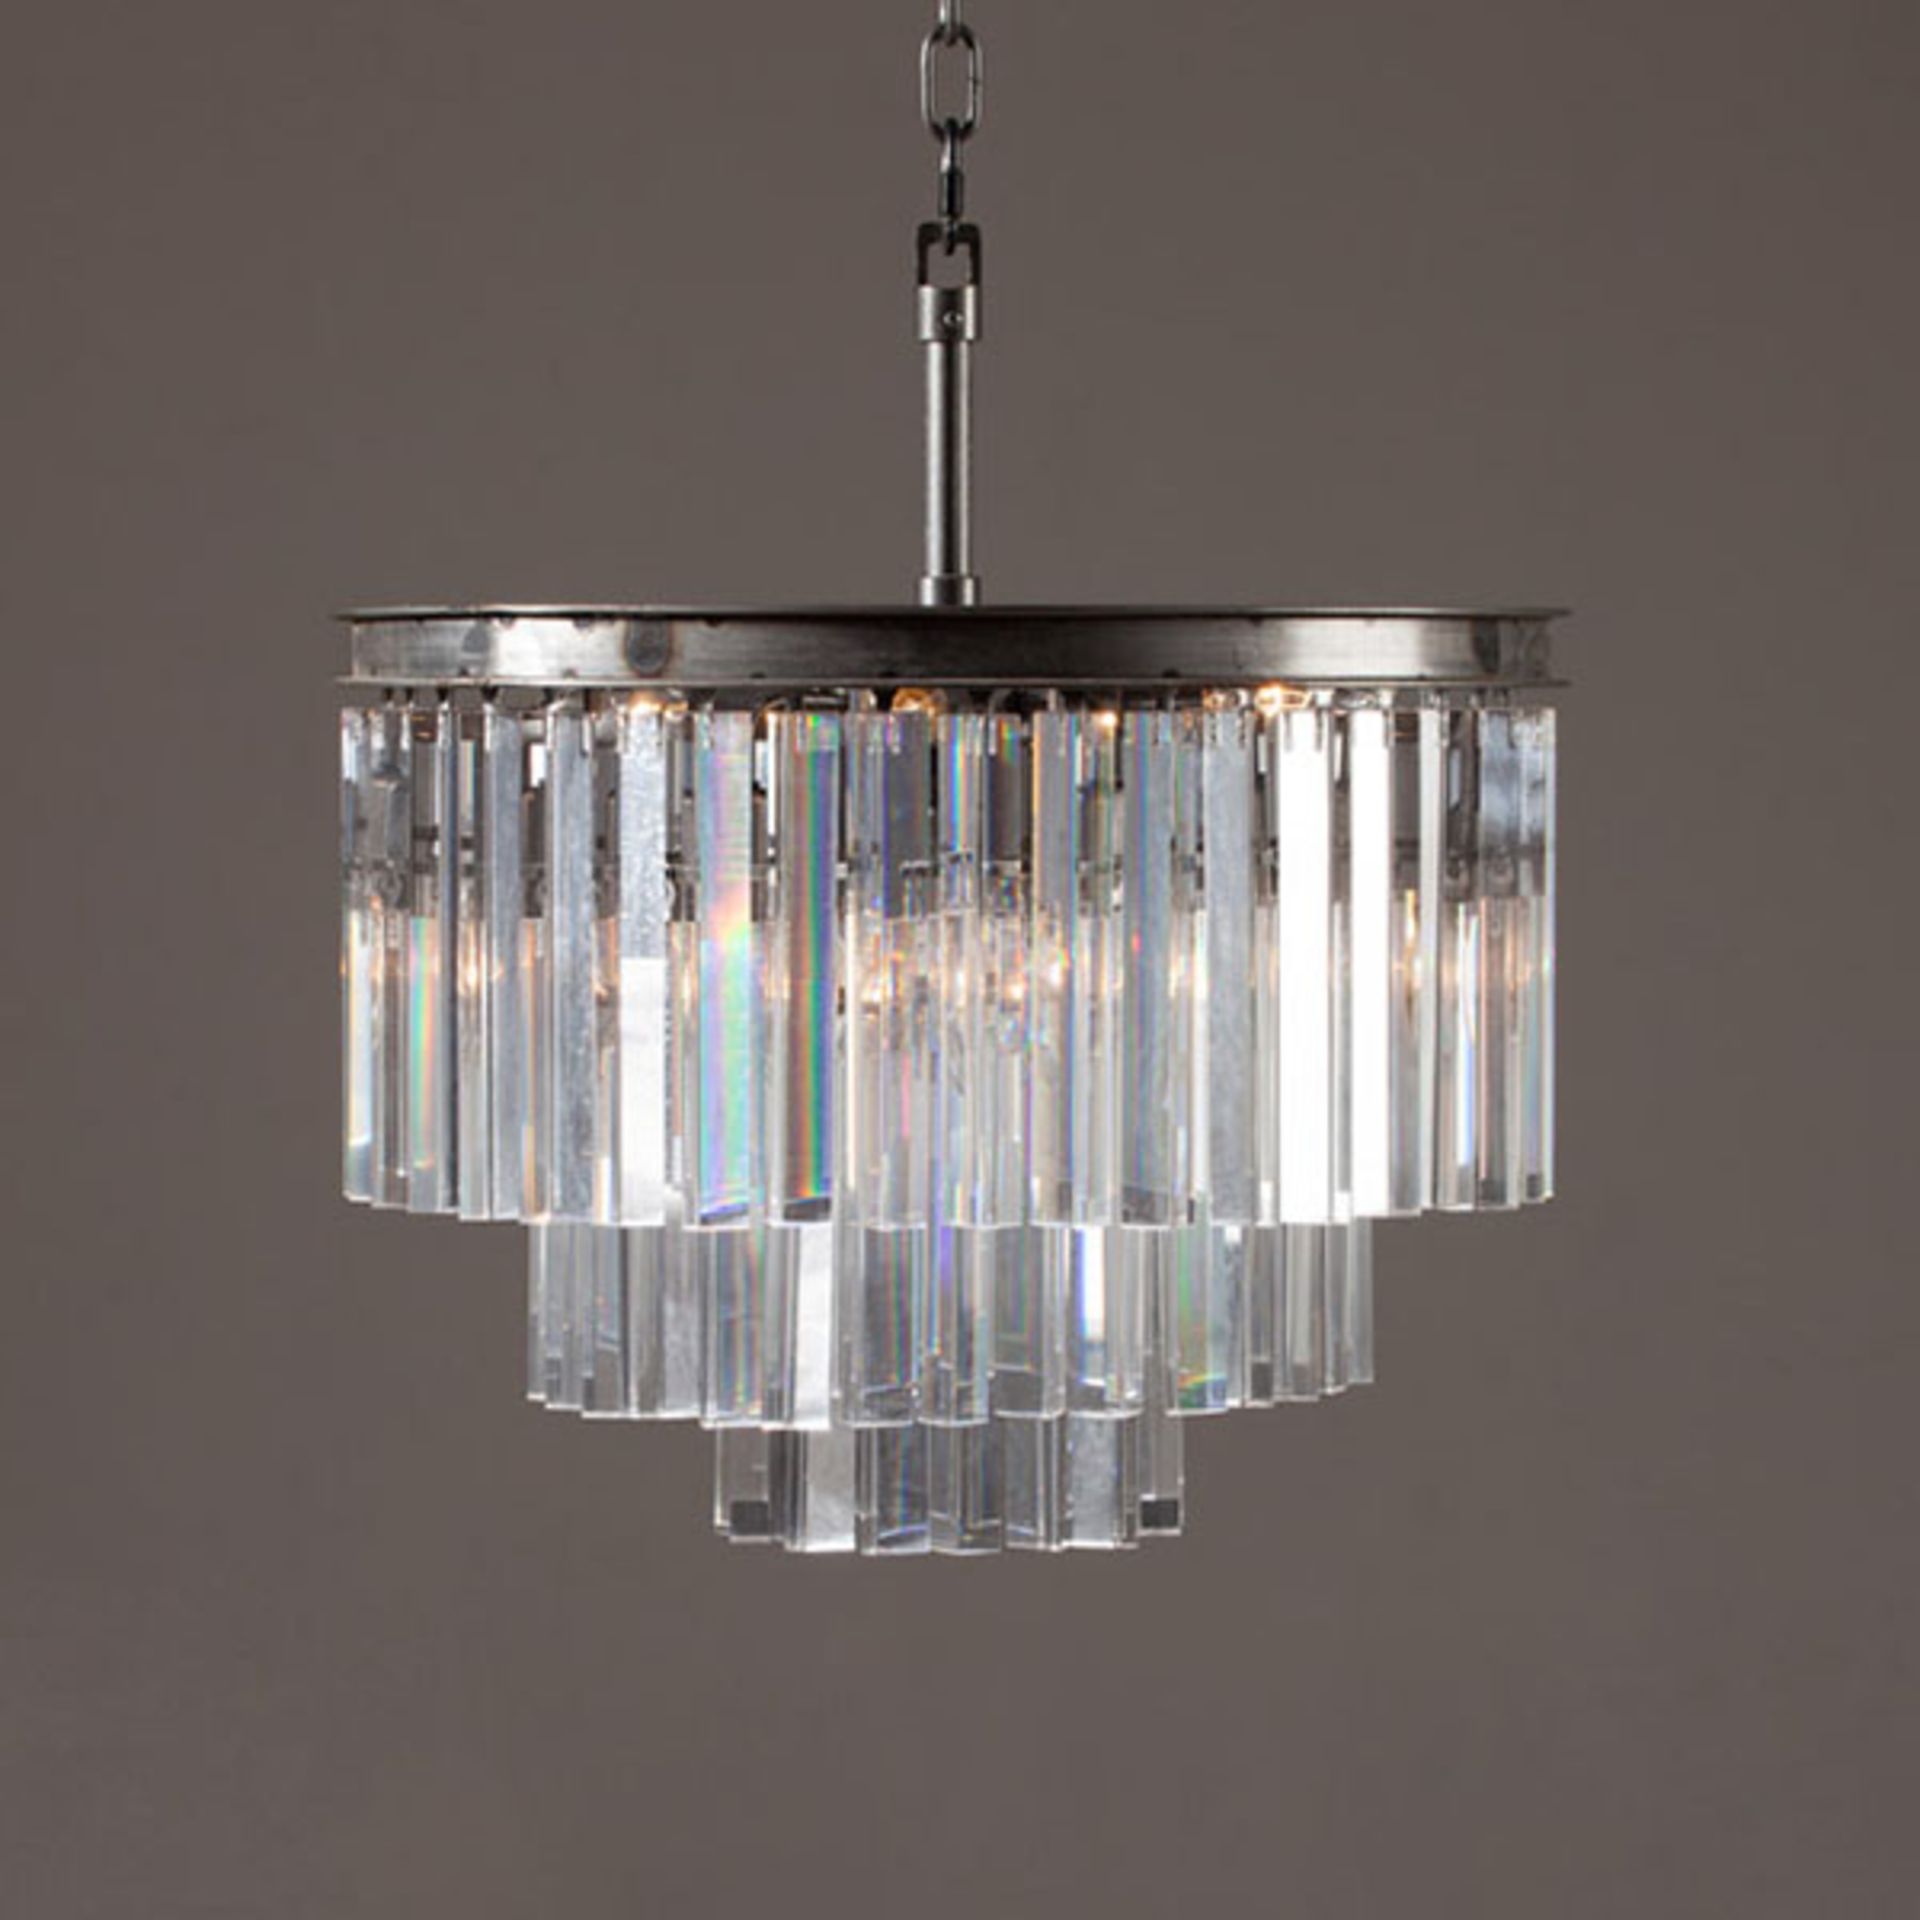 Odeon 3 Ring Chandelier (UK) The Odeon Lighting Collection Is A Modern Day Interpretation Of